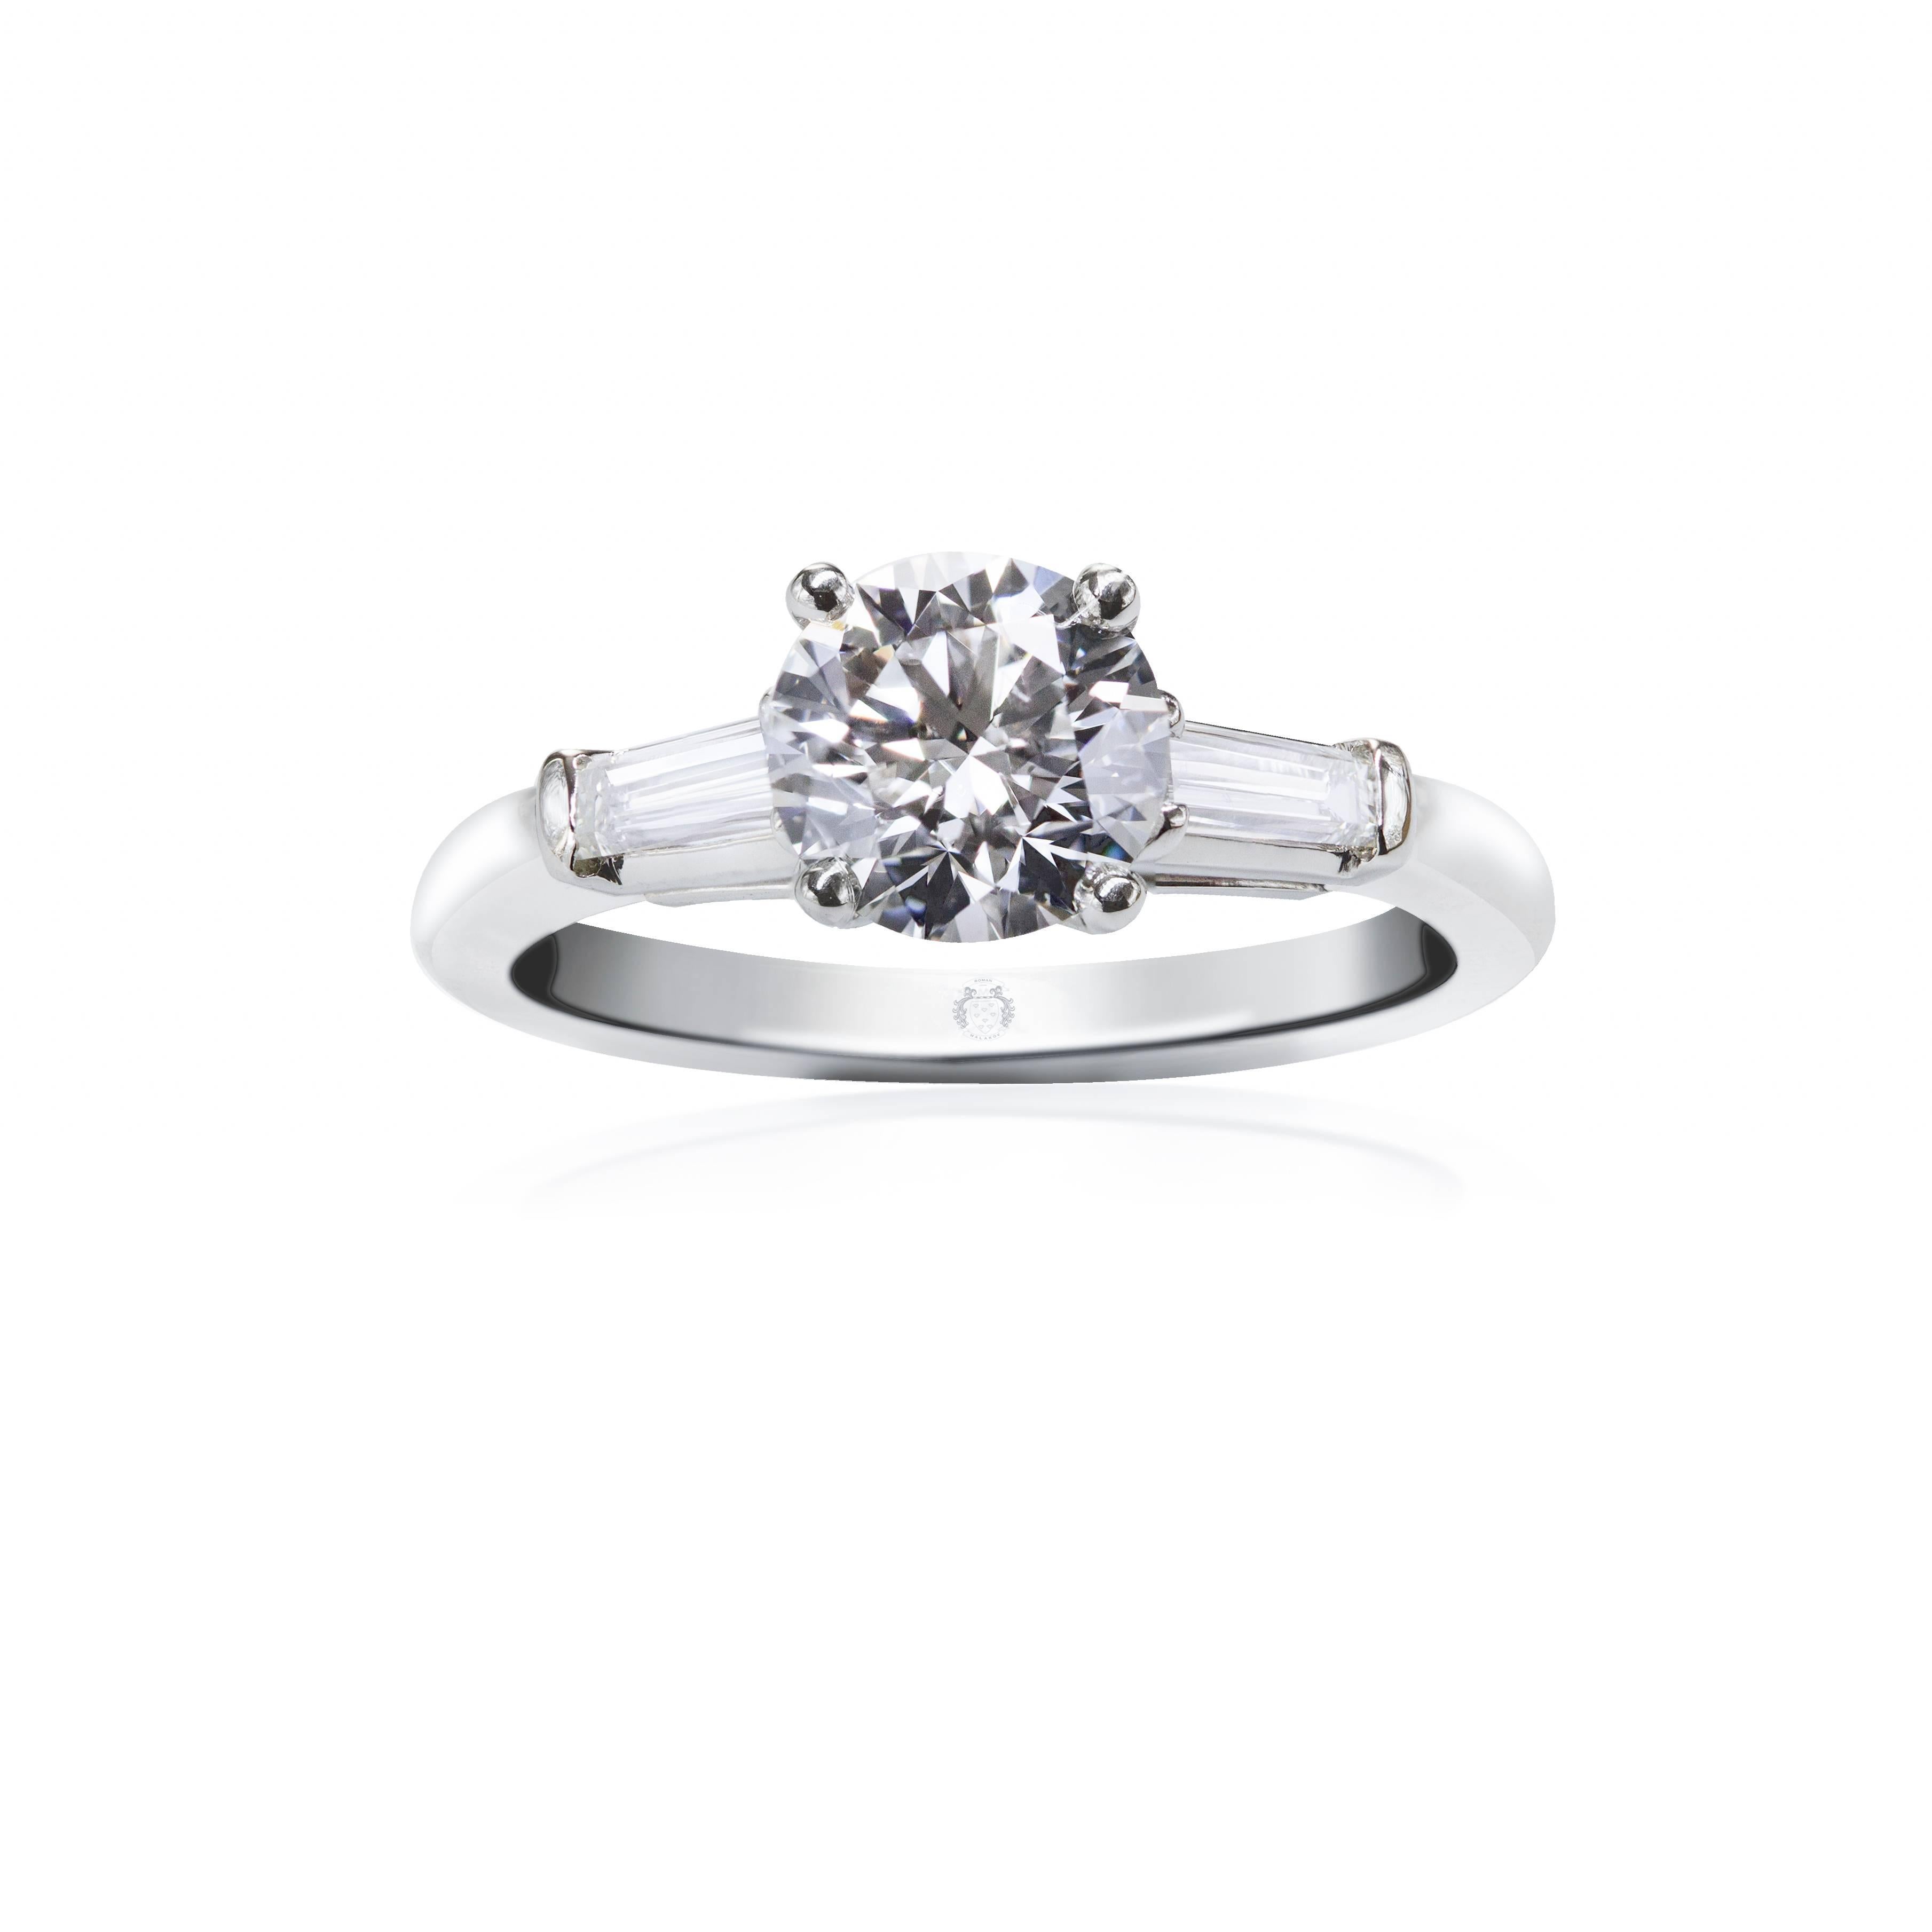 This engagement ring features a round brilliant diamond center stone that GIA certified as G color, VVS2 clarity. Tapered baguettes weighing 0.25 carats total accent the round center stone on either side. Set in platinum. Approxmate size 6 US